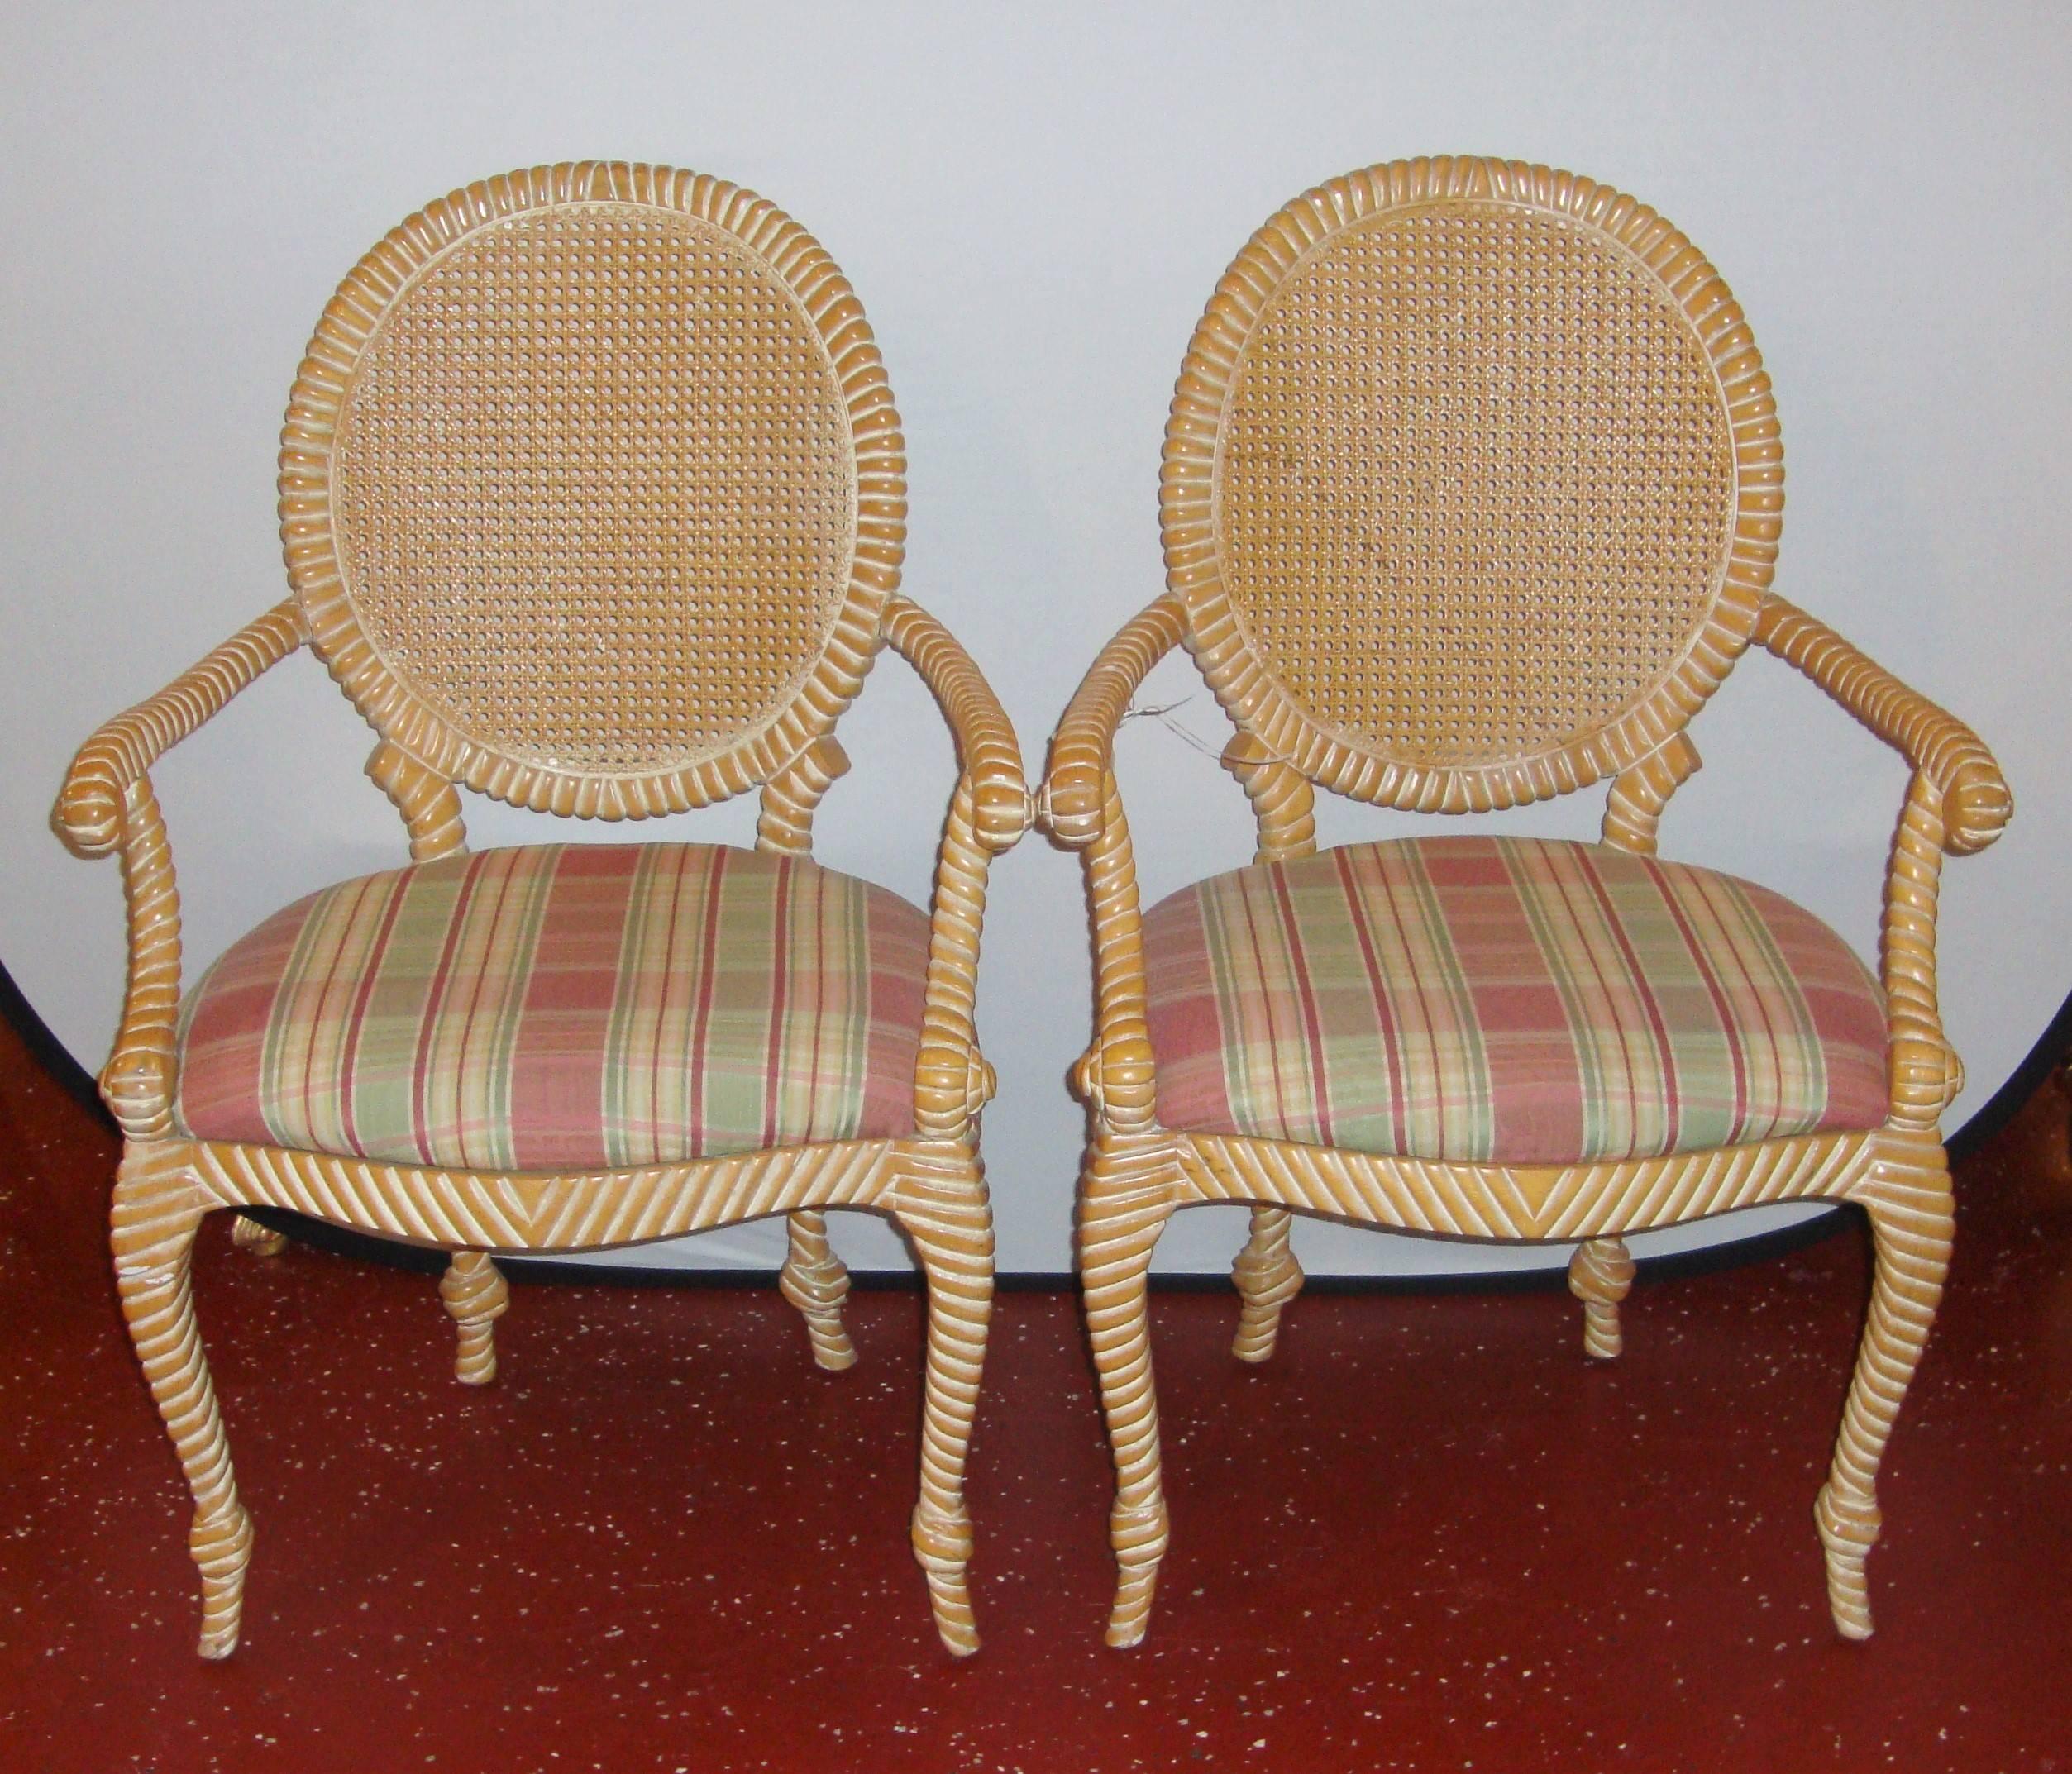 A gorgeous pair of twisted armchairs, with cane backs. With plaid patterned upholstery.